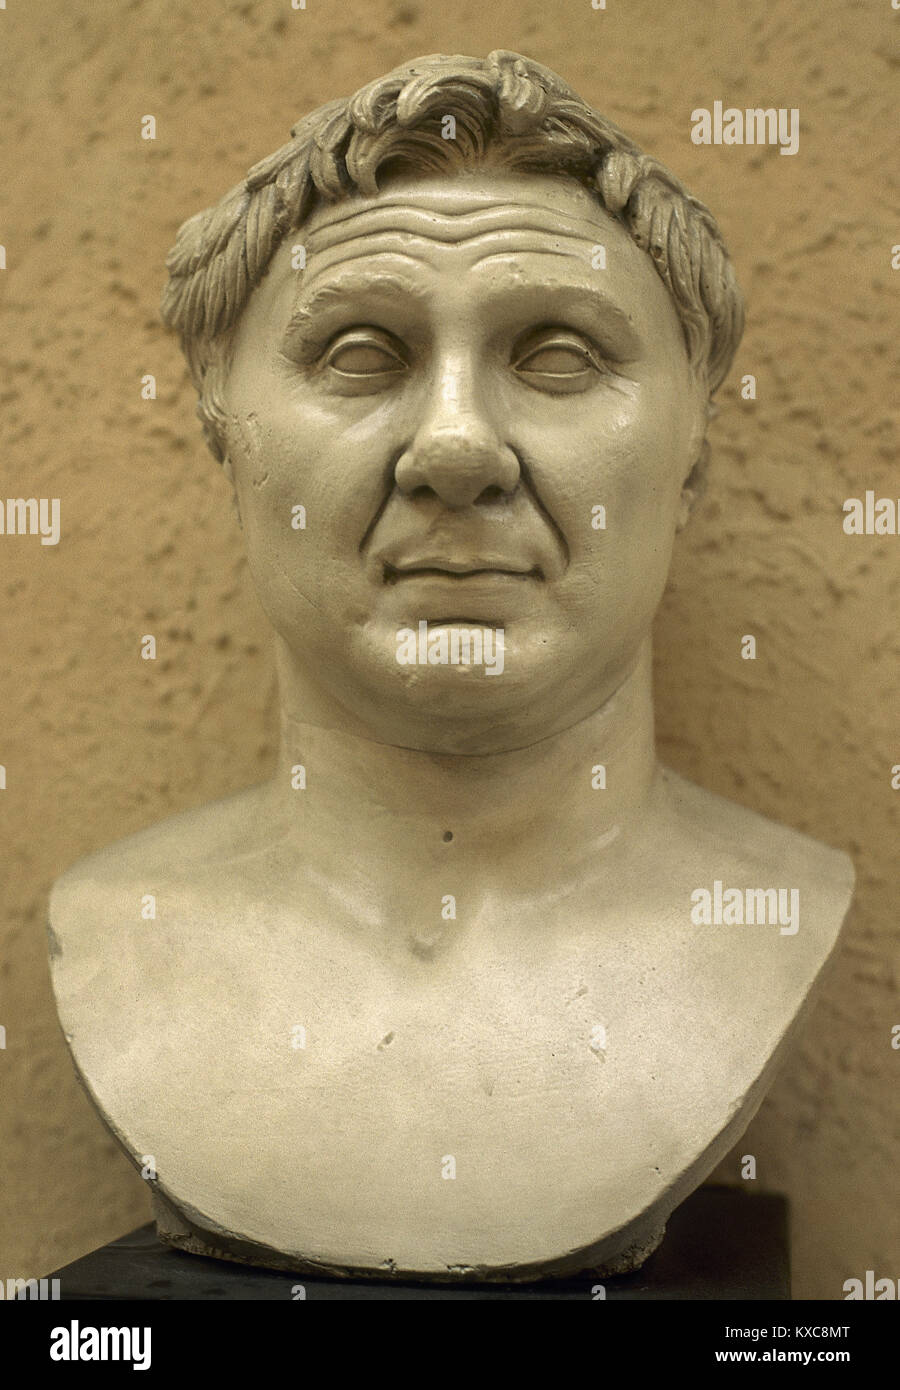 Pompey (106 BC-48 BC). Military and political leader or the late Roman Republic. Plaster copy. Bust. Museum of Roman Civilization. Rome. Italy. Stock Photo